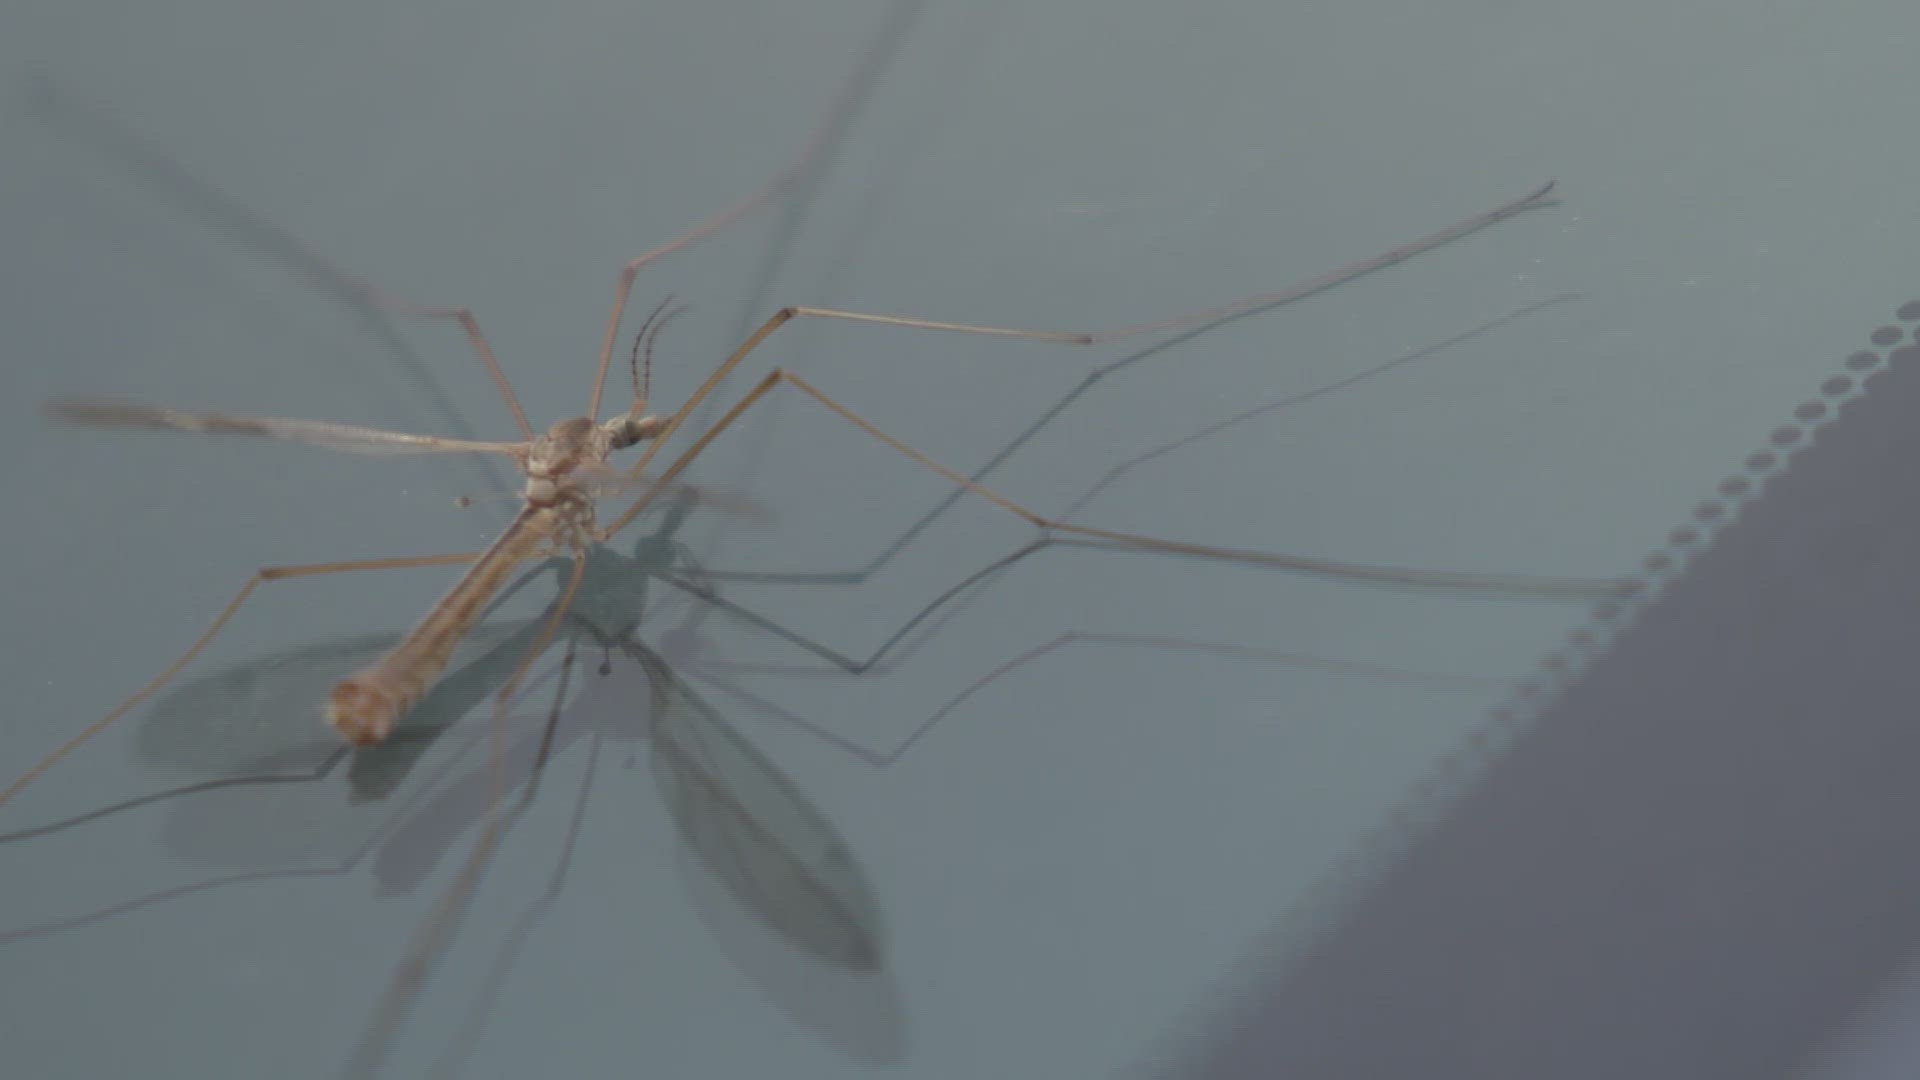 The mosquito-looking insects have appeared in large numbers this spring, harmless and incredibly helpful.